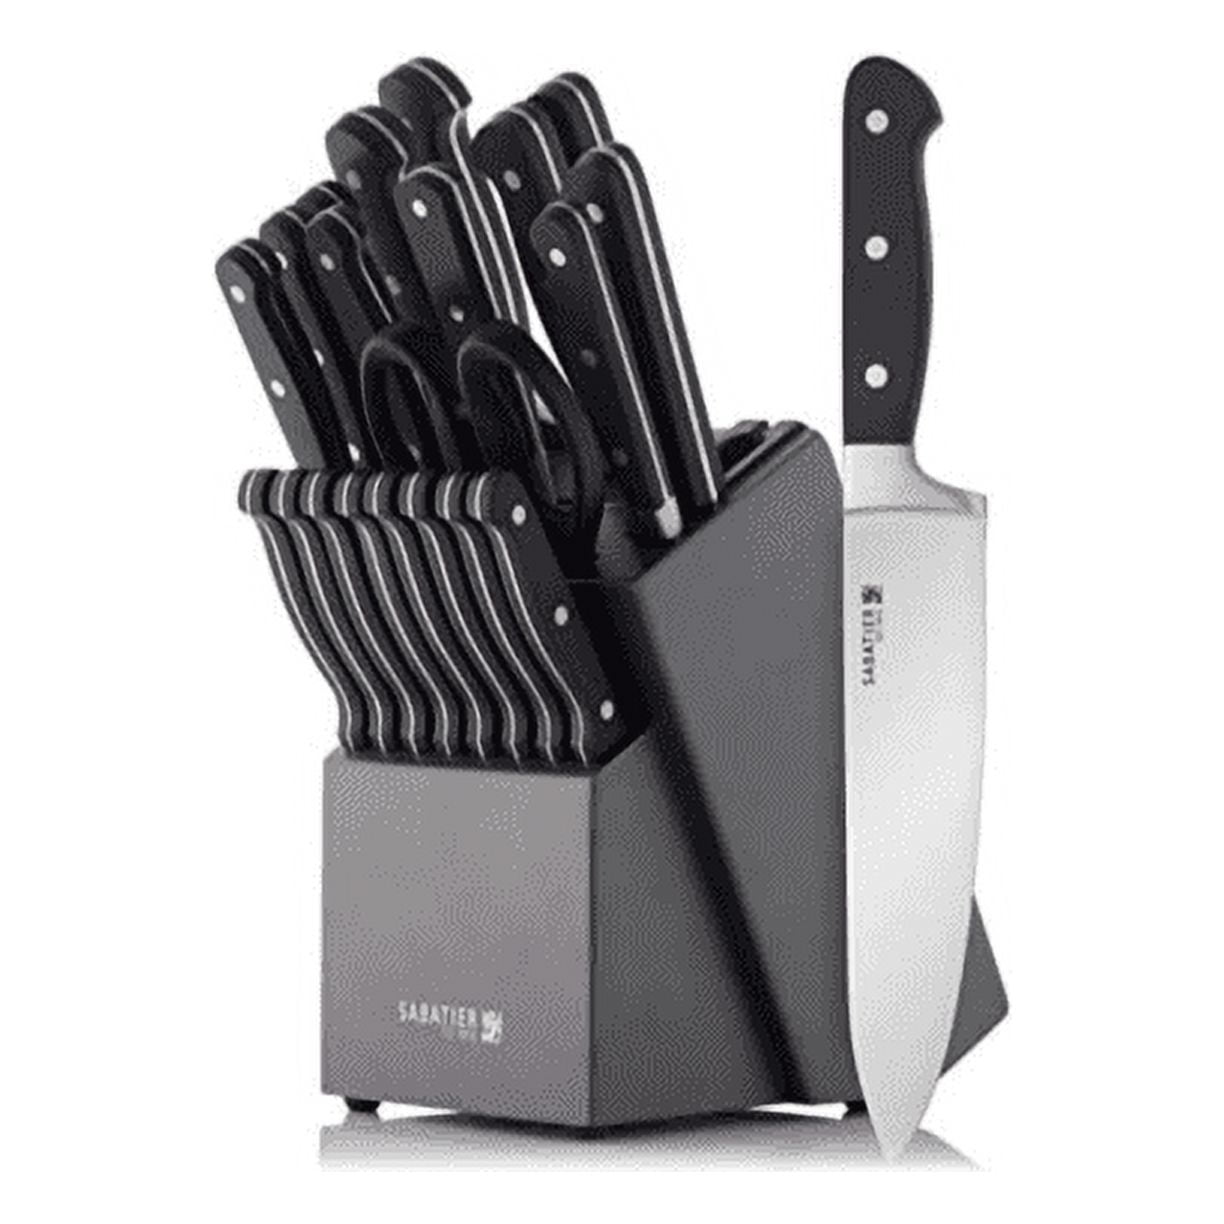 Lion Sabatier Fully-Forged 5 Piece Knife Set With Block